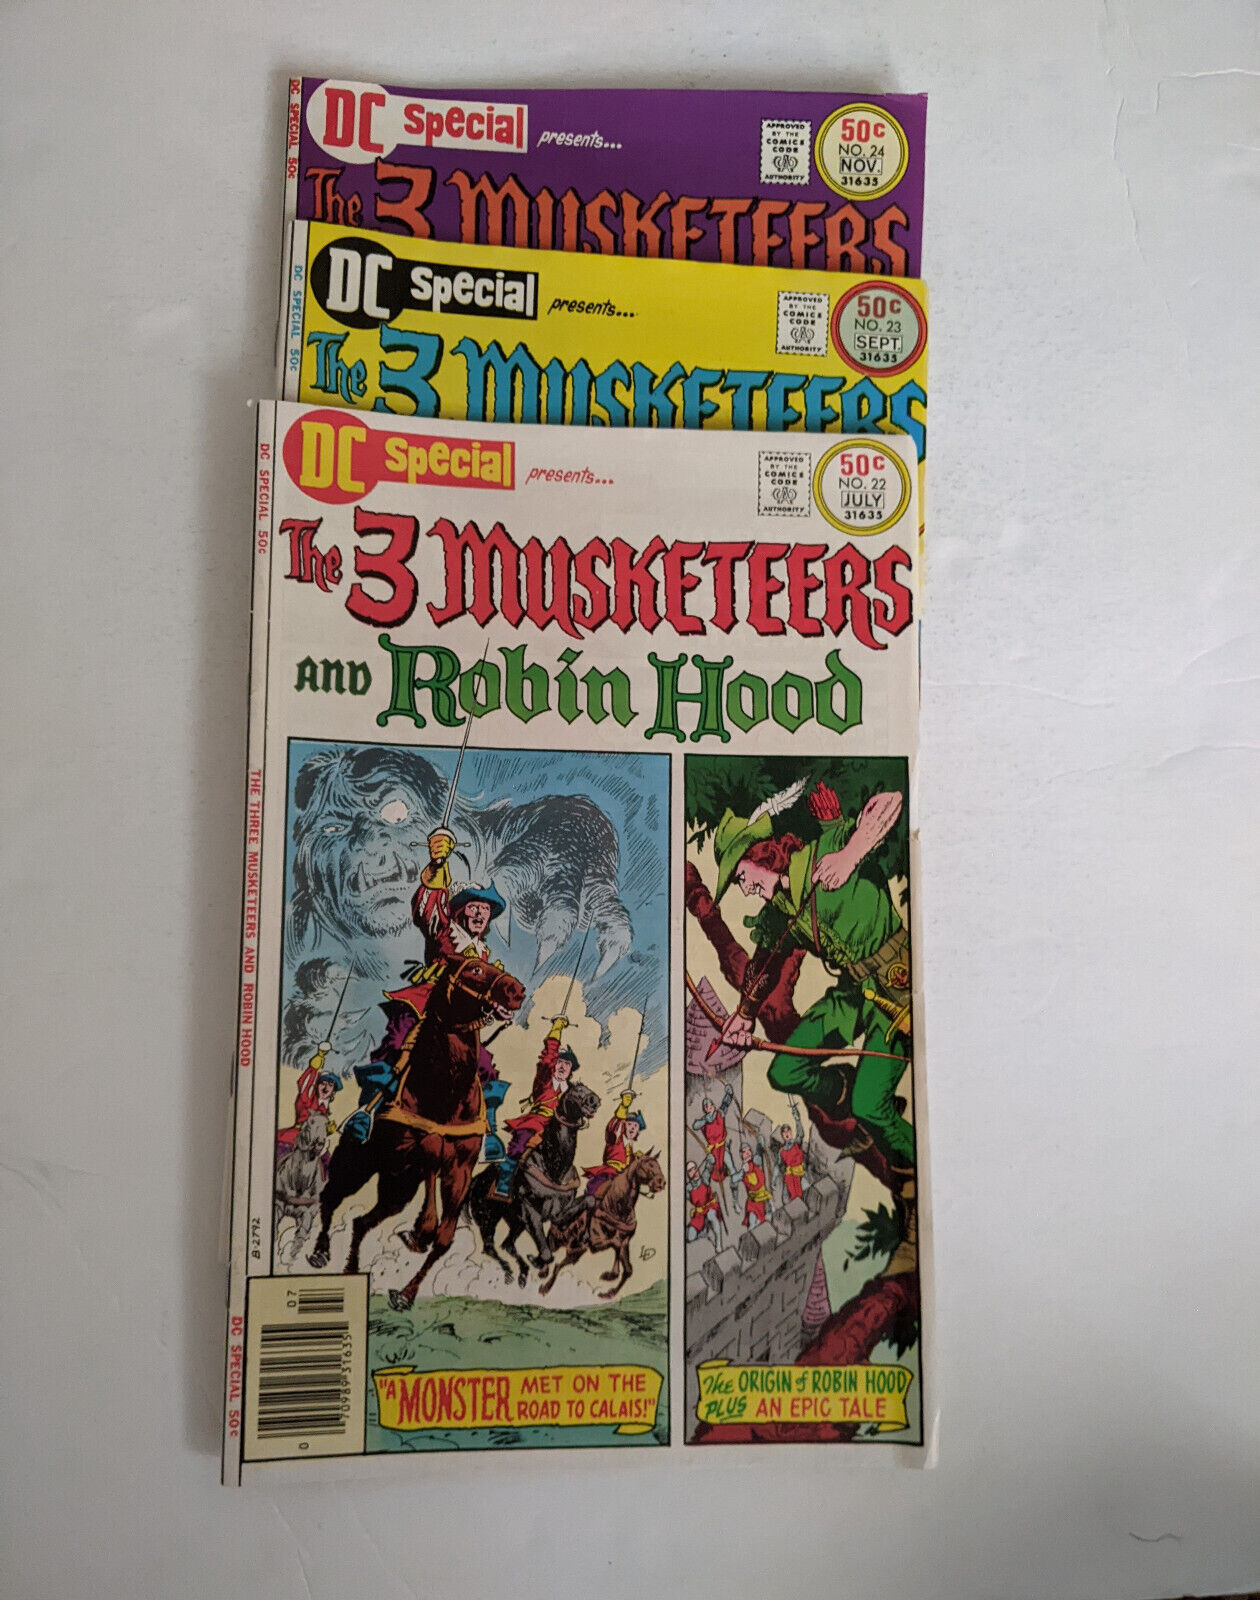 DC Special 22-24: 3 Musketeers/Robin Hood, 1976, bronze age DC Comics, NM